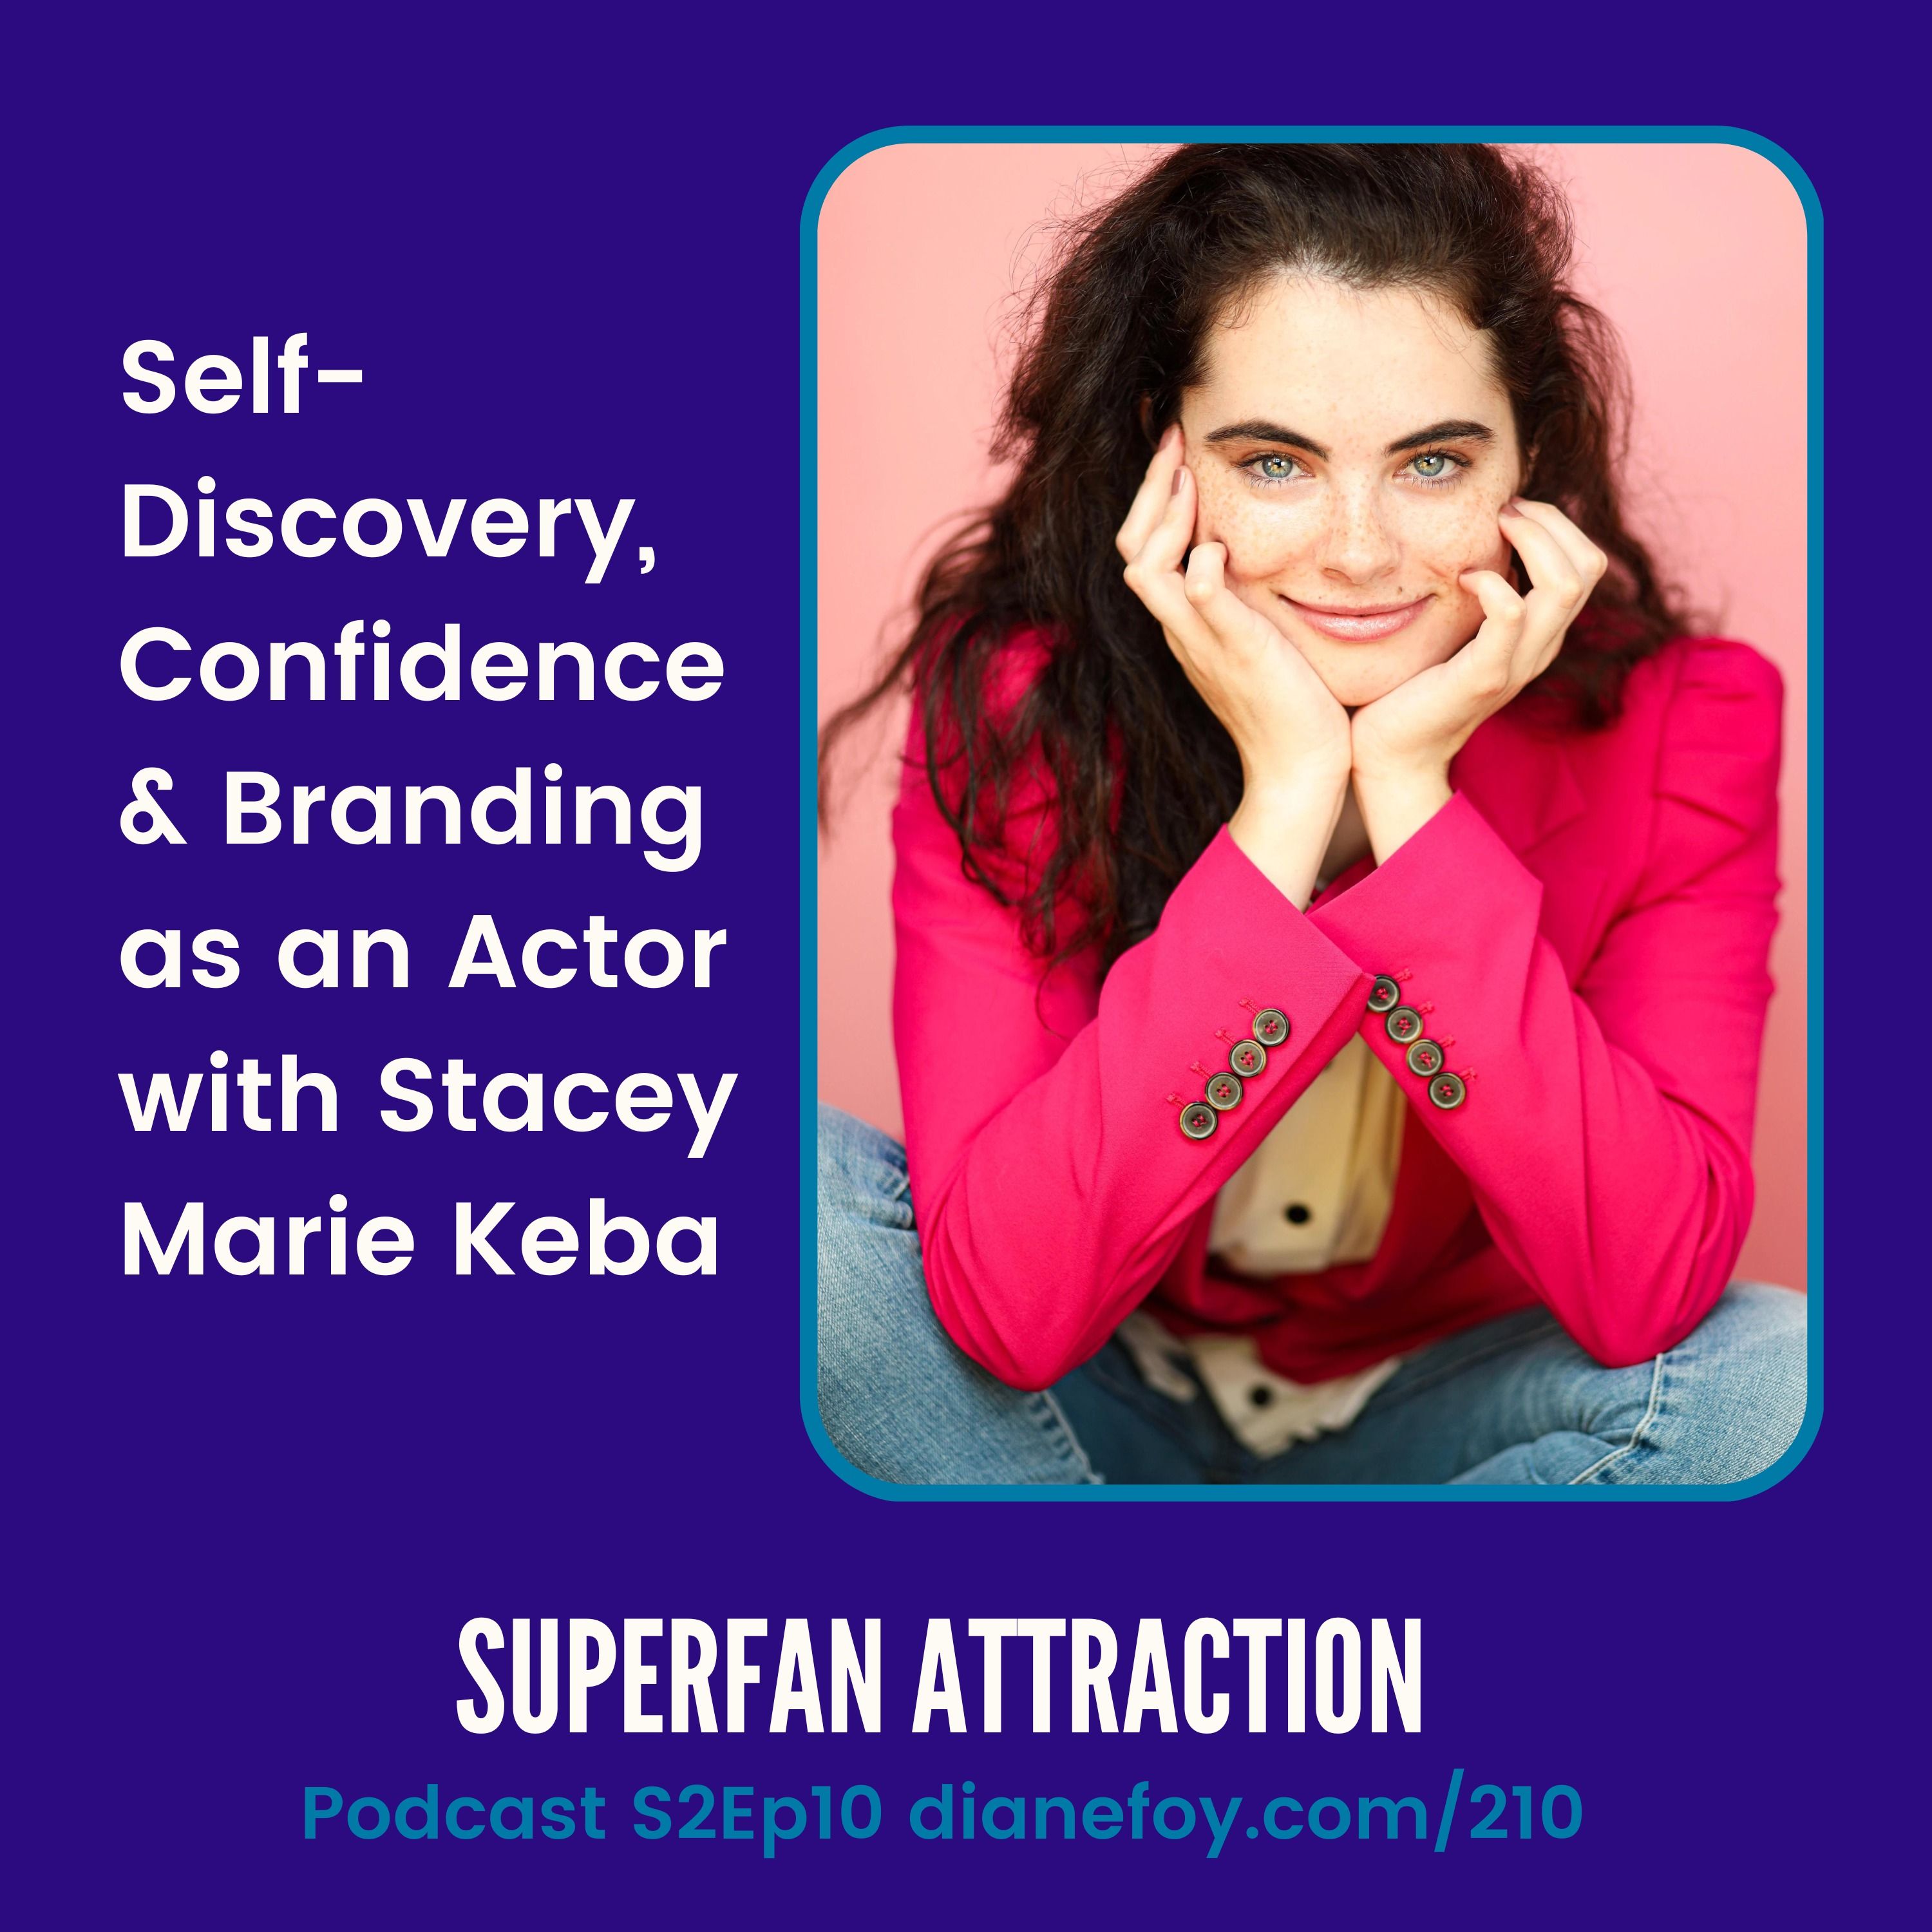 Self-Discovery, Confidence & Branding with Actor Stacey Marie Keba